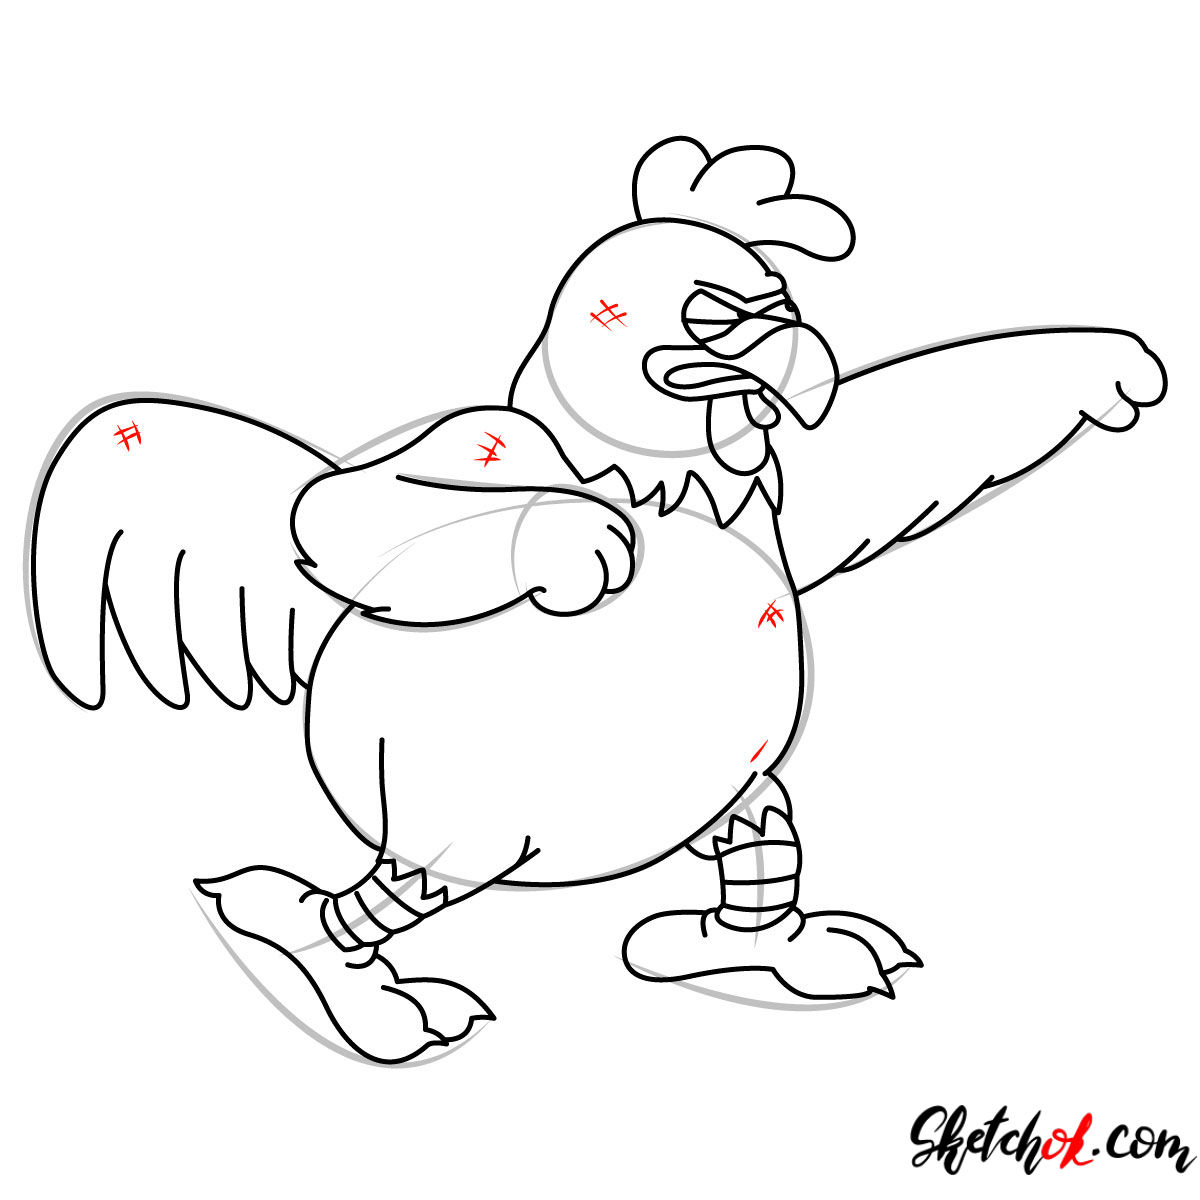 How to draw Ernie the Giant Chicken - step 11